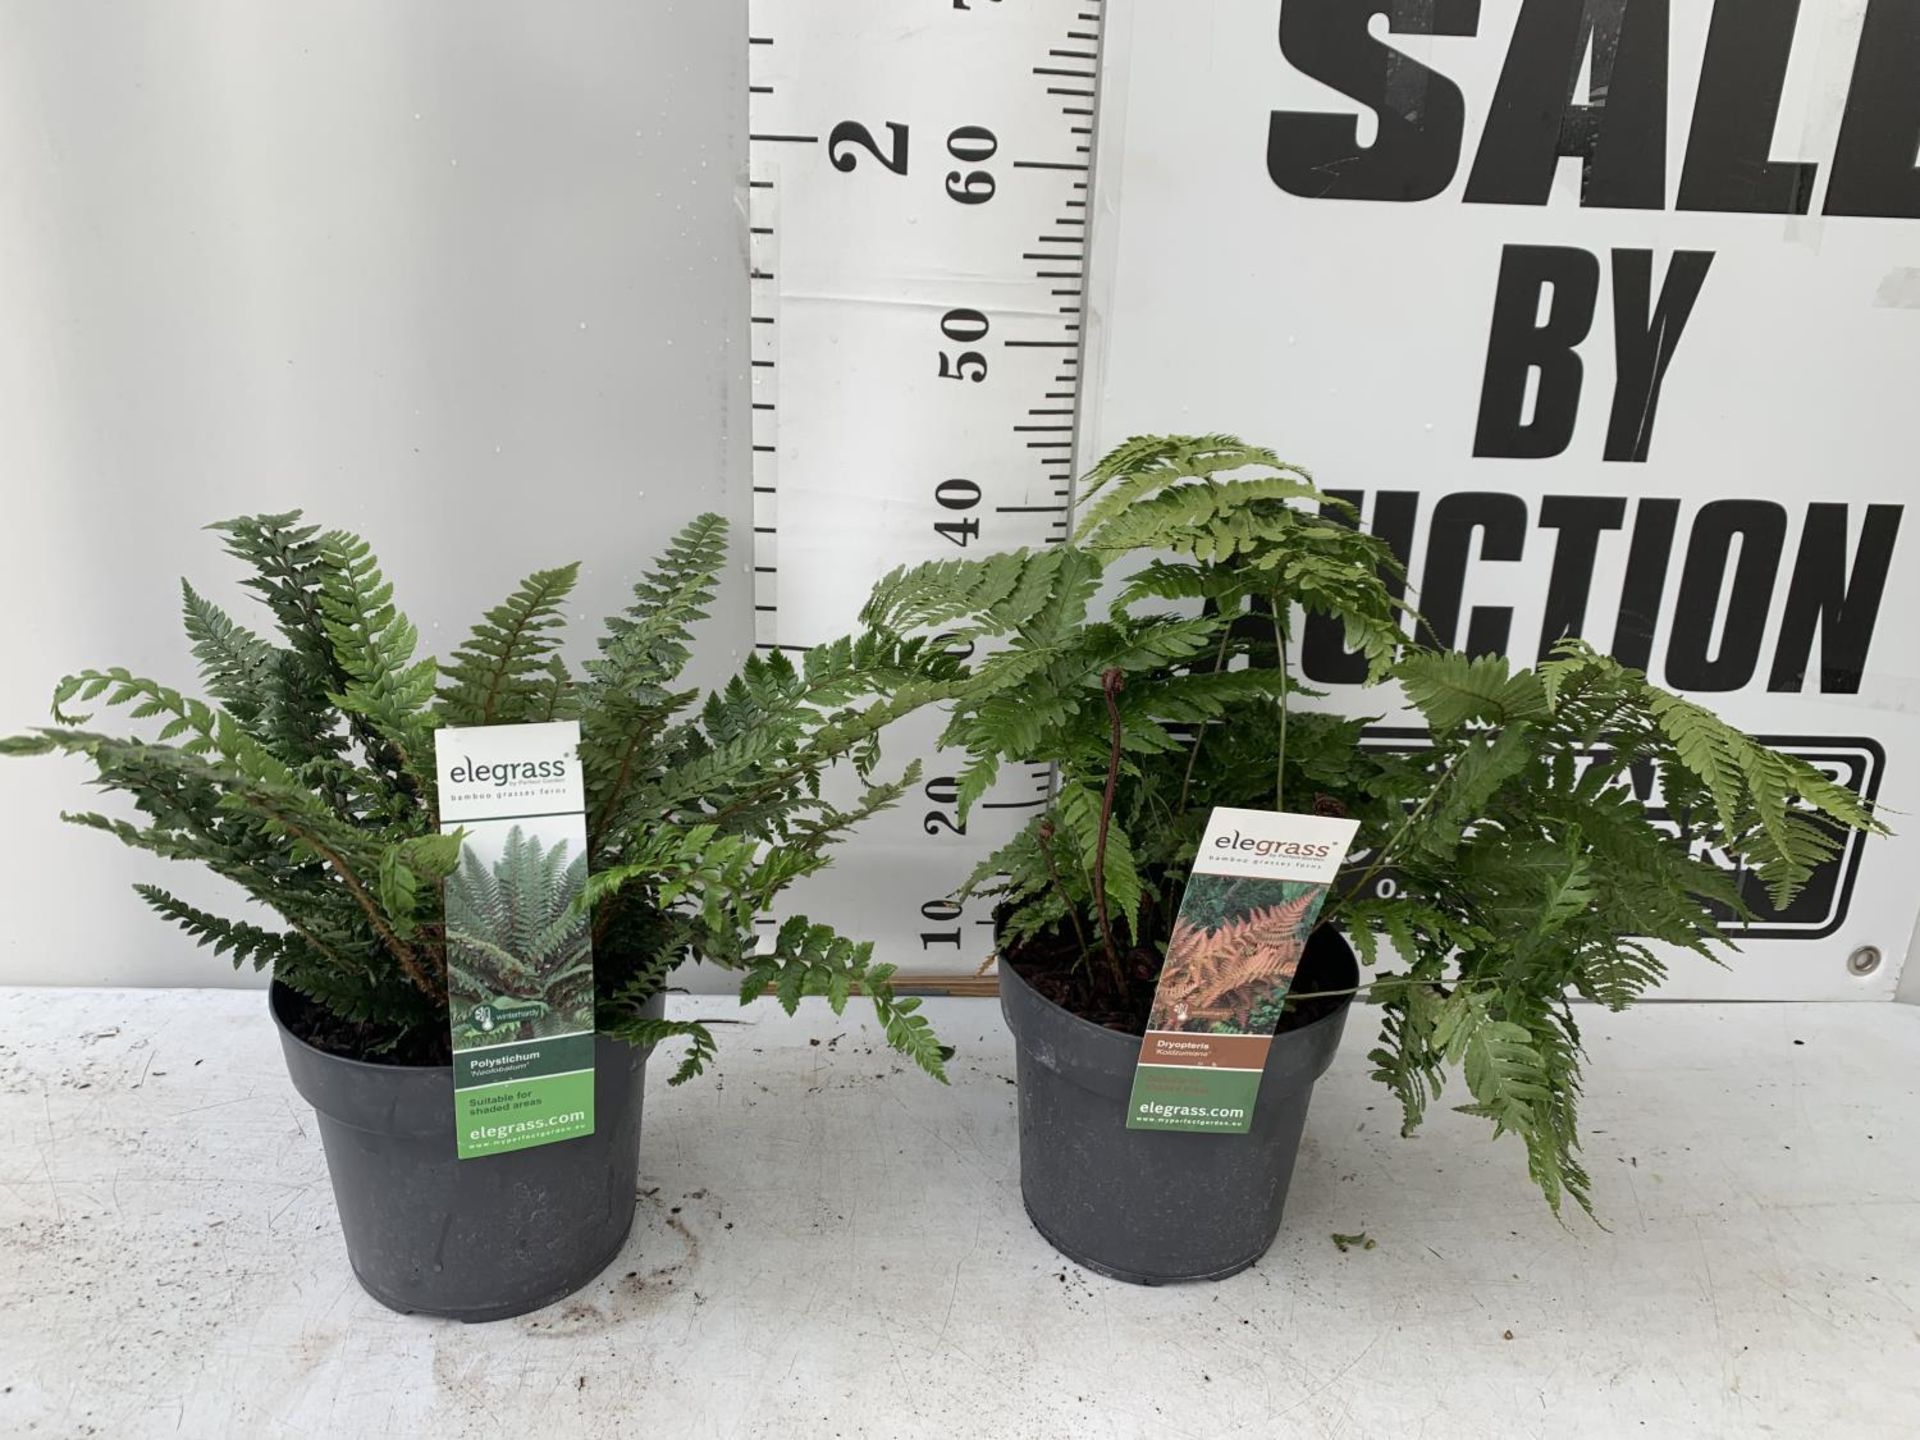 TWO LARGE ELEGRASS FERNS POLYSTICHUM AND DRYOPTERIS IN 3 LTR POTS 30-40CM TALL TO BE SOLD FOR THE